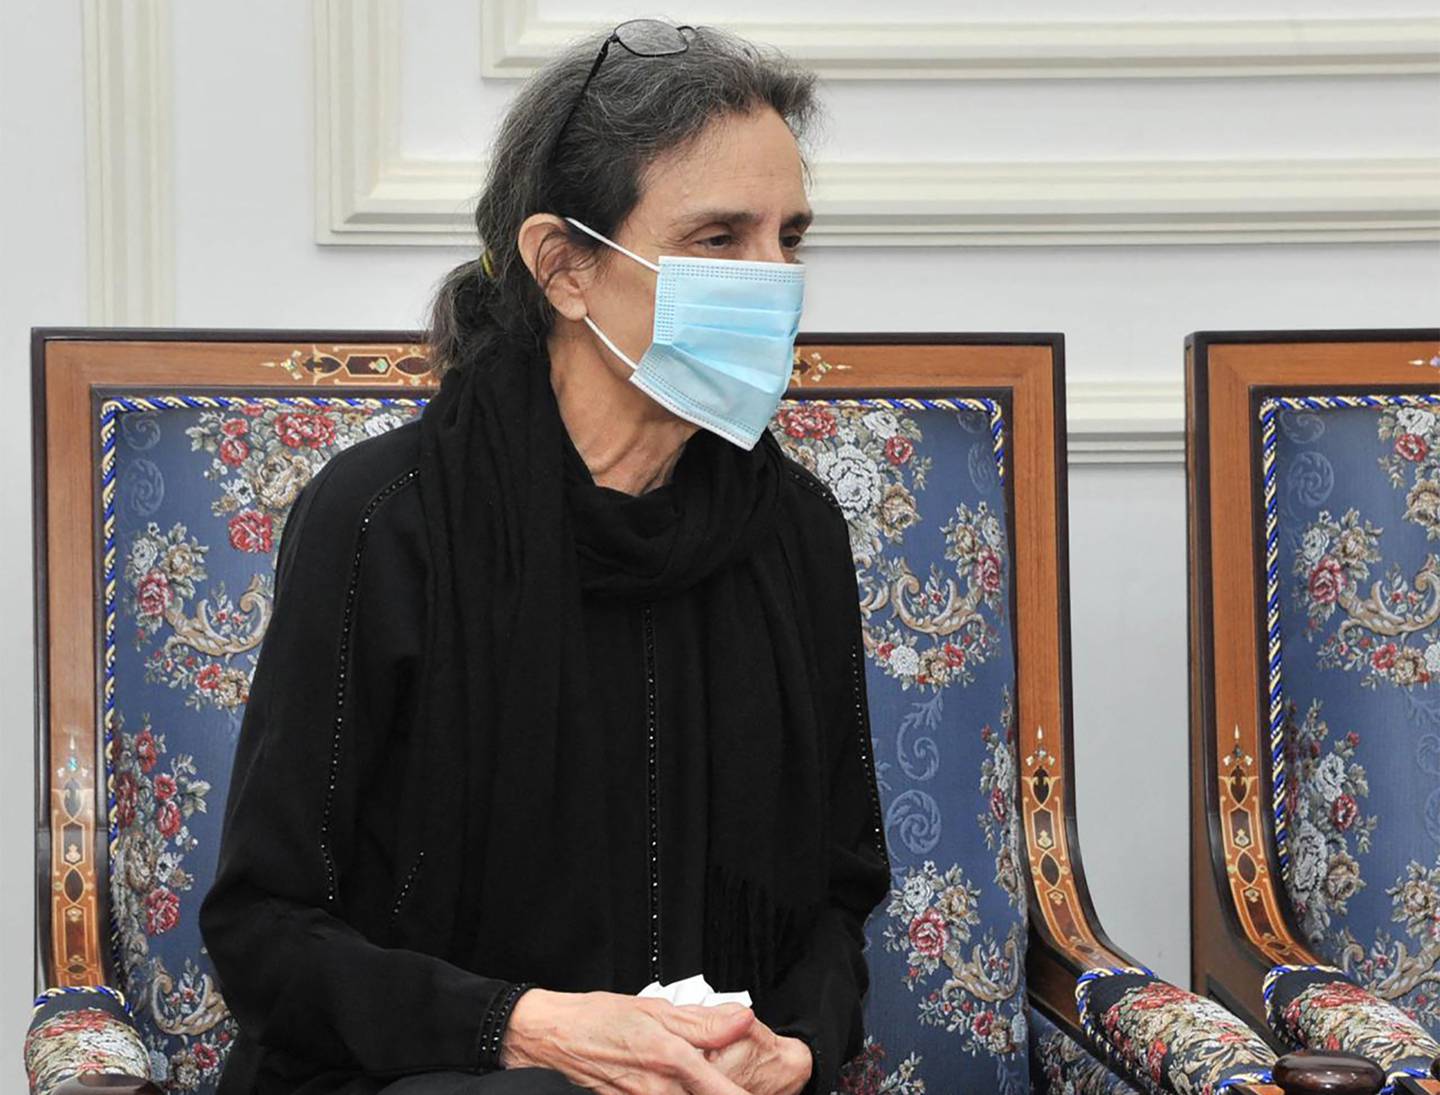 Sandra Loli had worked on and off in Yemen for more than three decades before she was detained. AFP